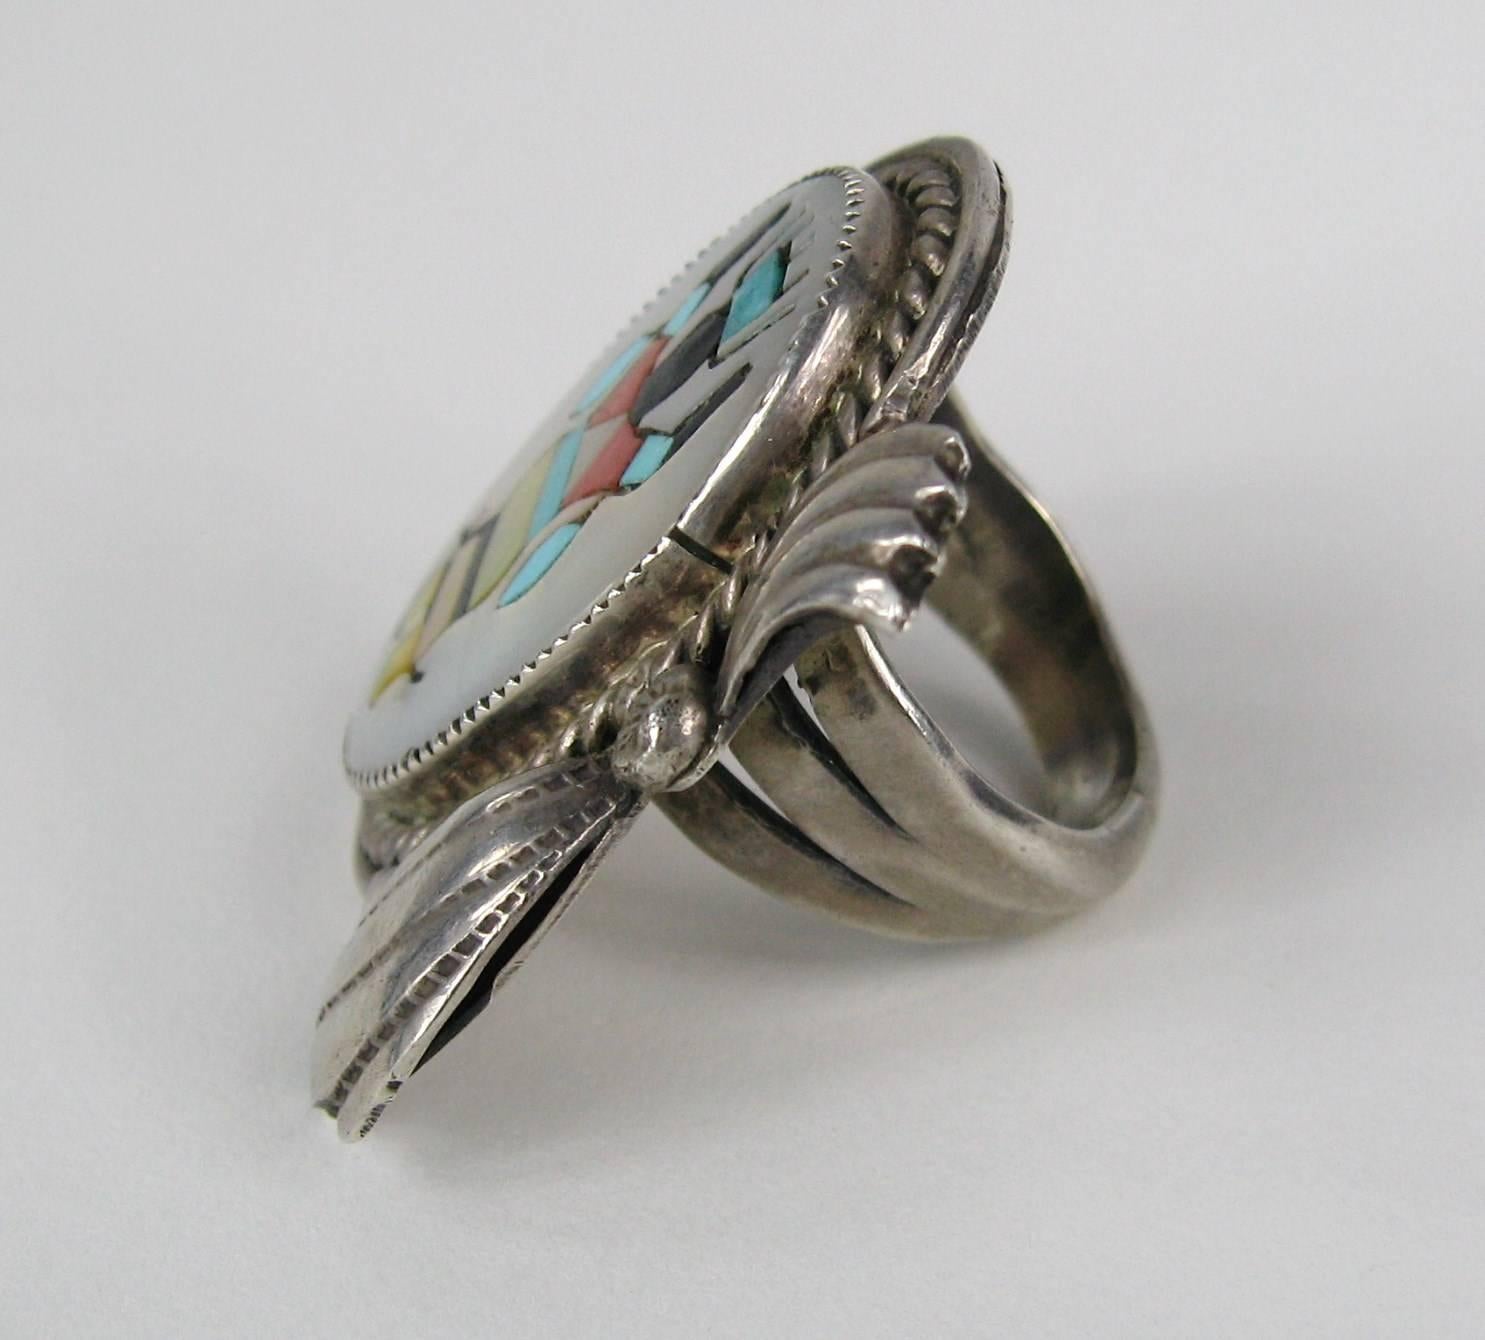 Stunning Craftsmanship on this Gilert Adeky Ring. This has Exquiste inlay. Ring Measures 1.40 in.  top to bottom x 1.30 in. wide. Ring is a size 7. This is out of a massive collection of Hopi, Zuni, Navajo, Southwestern, sterling silver, costume